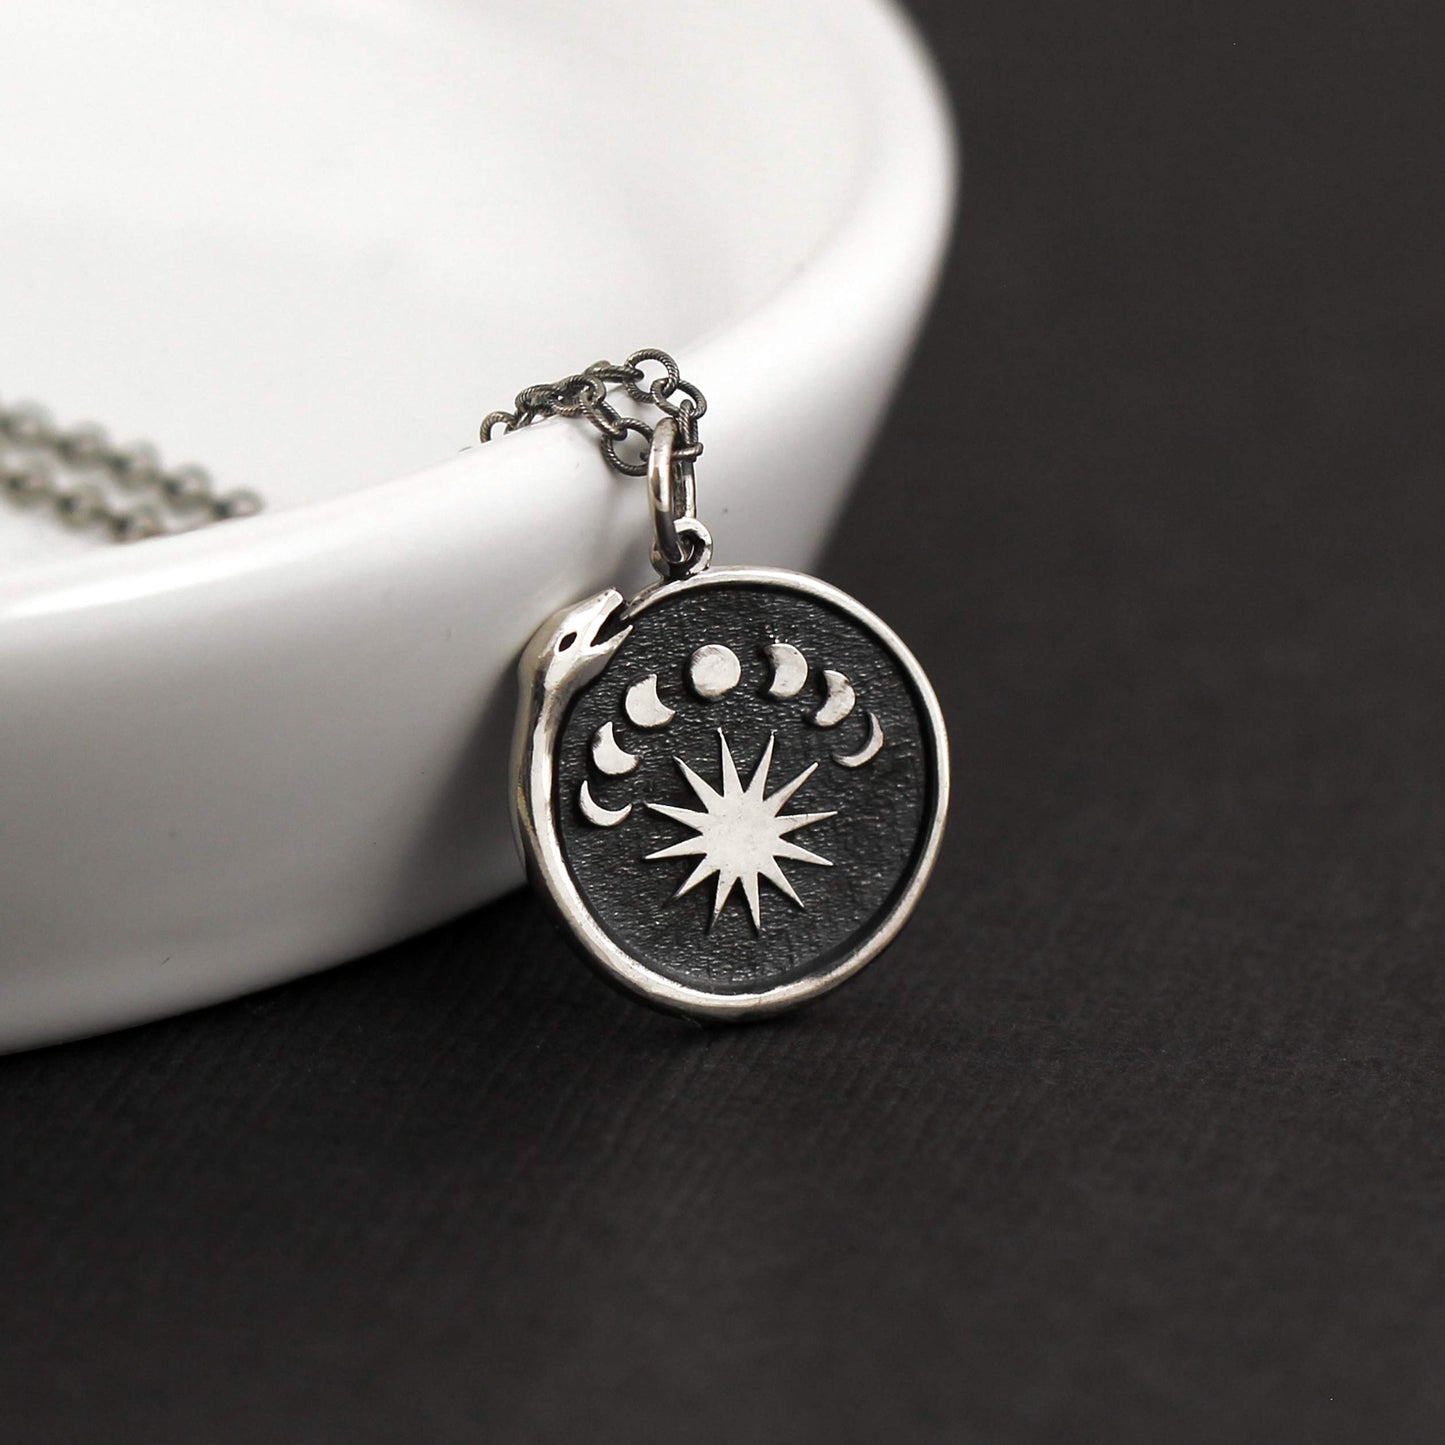 Two Cups Sterling Silver Moon Phase Ouroboros Charm Necklace • Lunar Snake Pendant